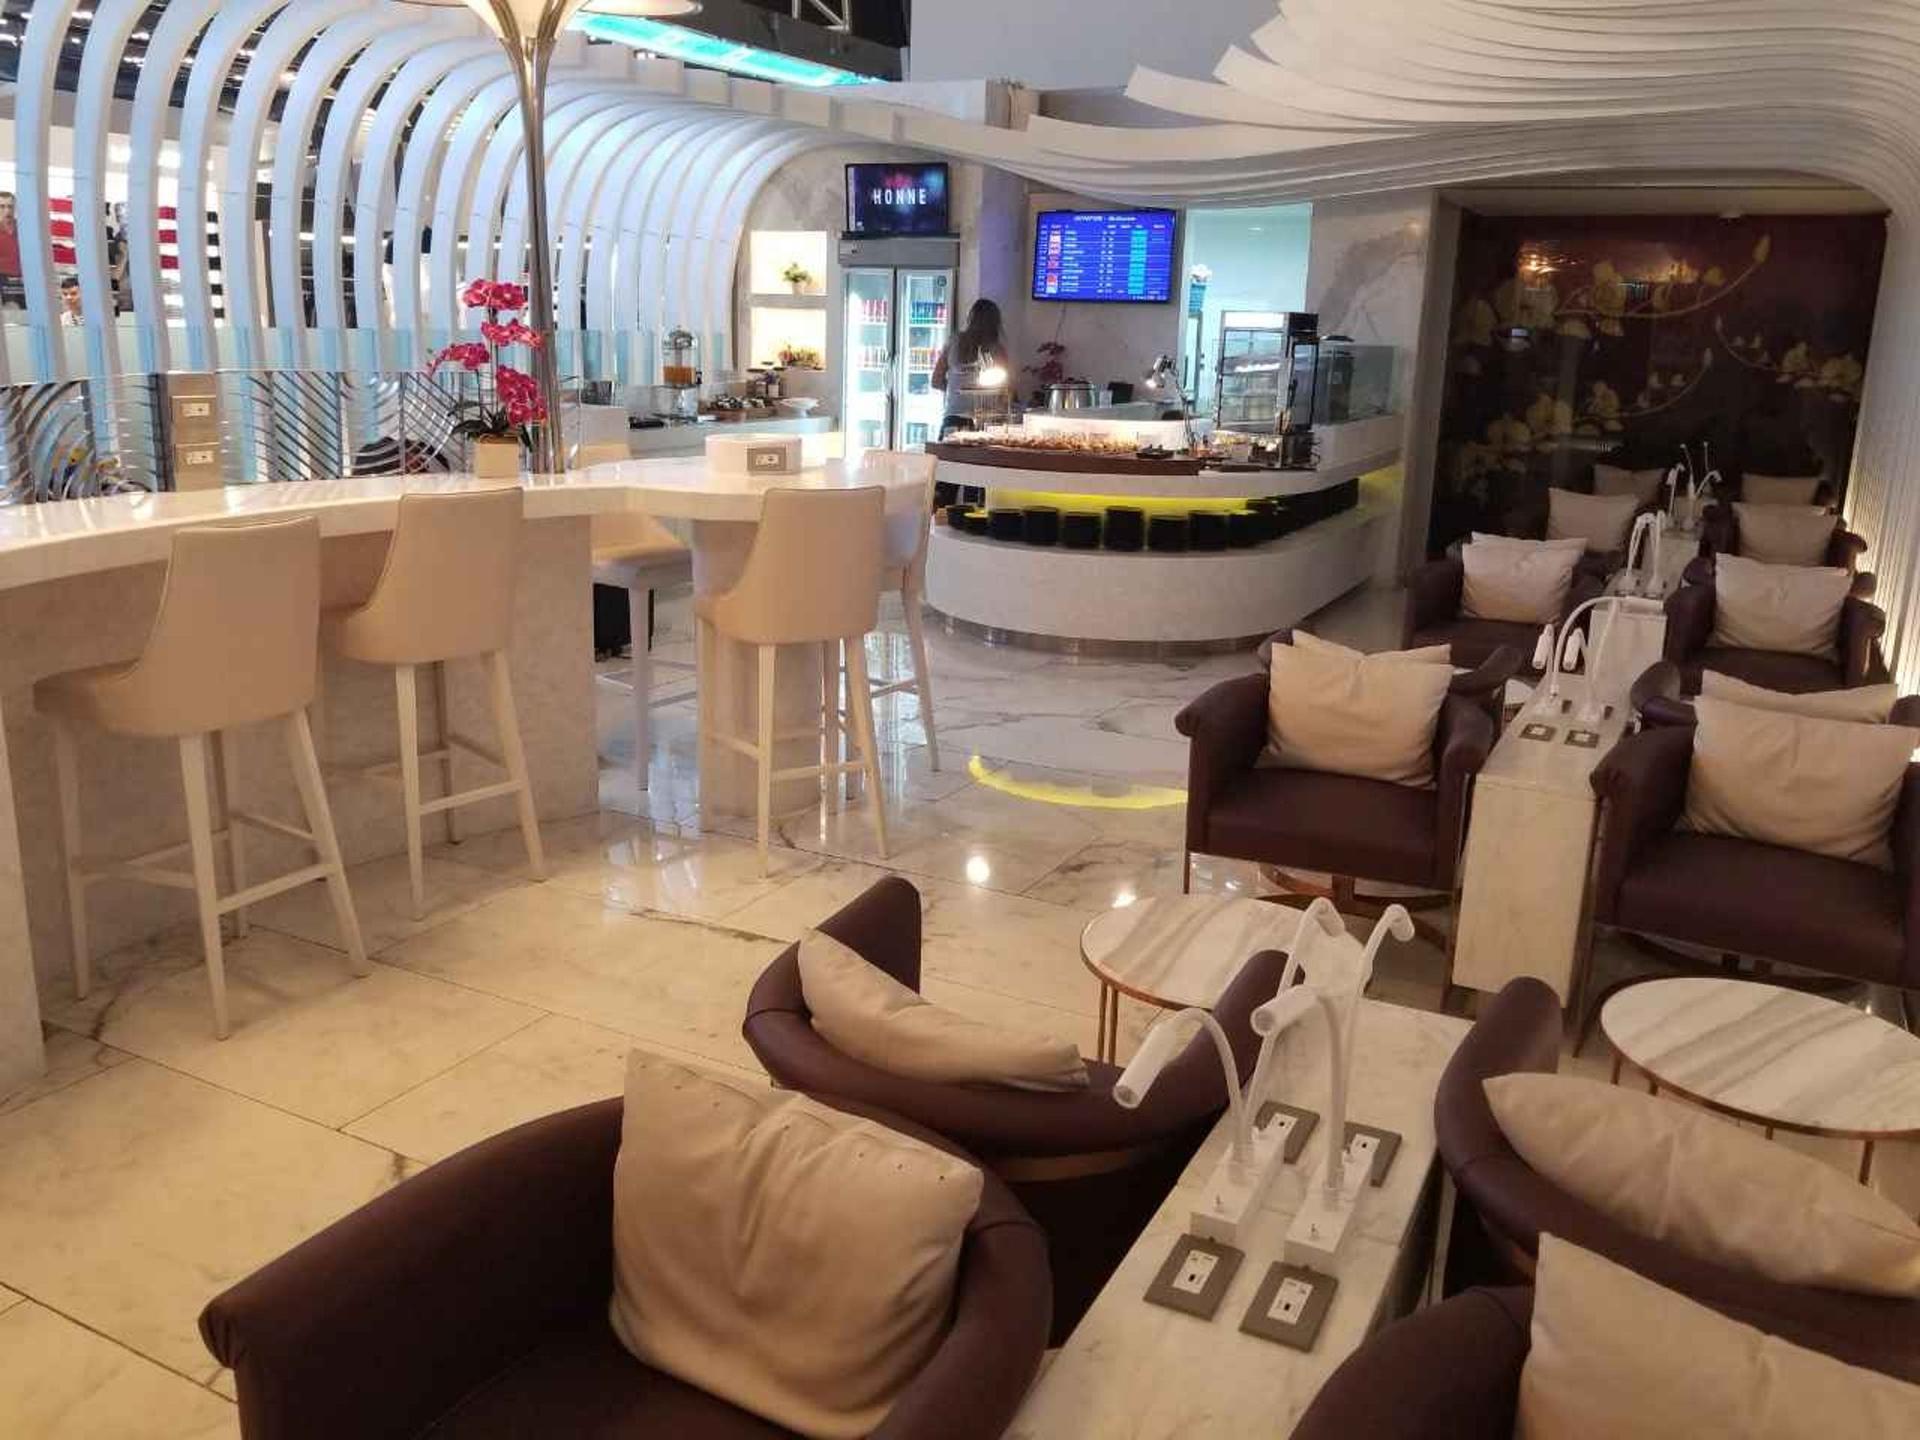 Thai Airways Royal Orchid Lounge image 8 of 9